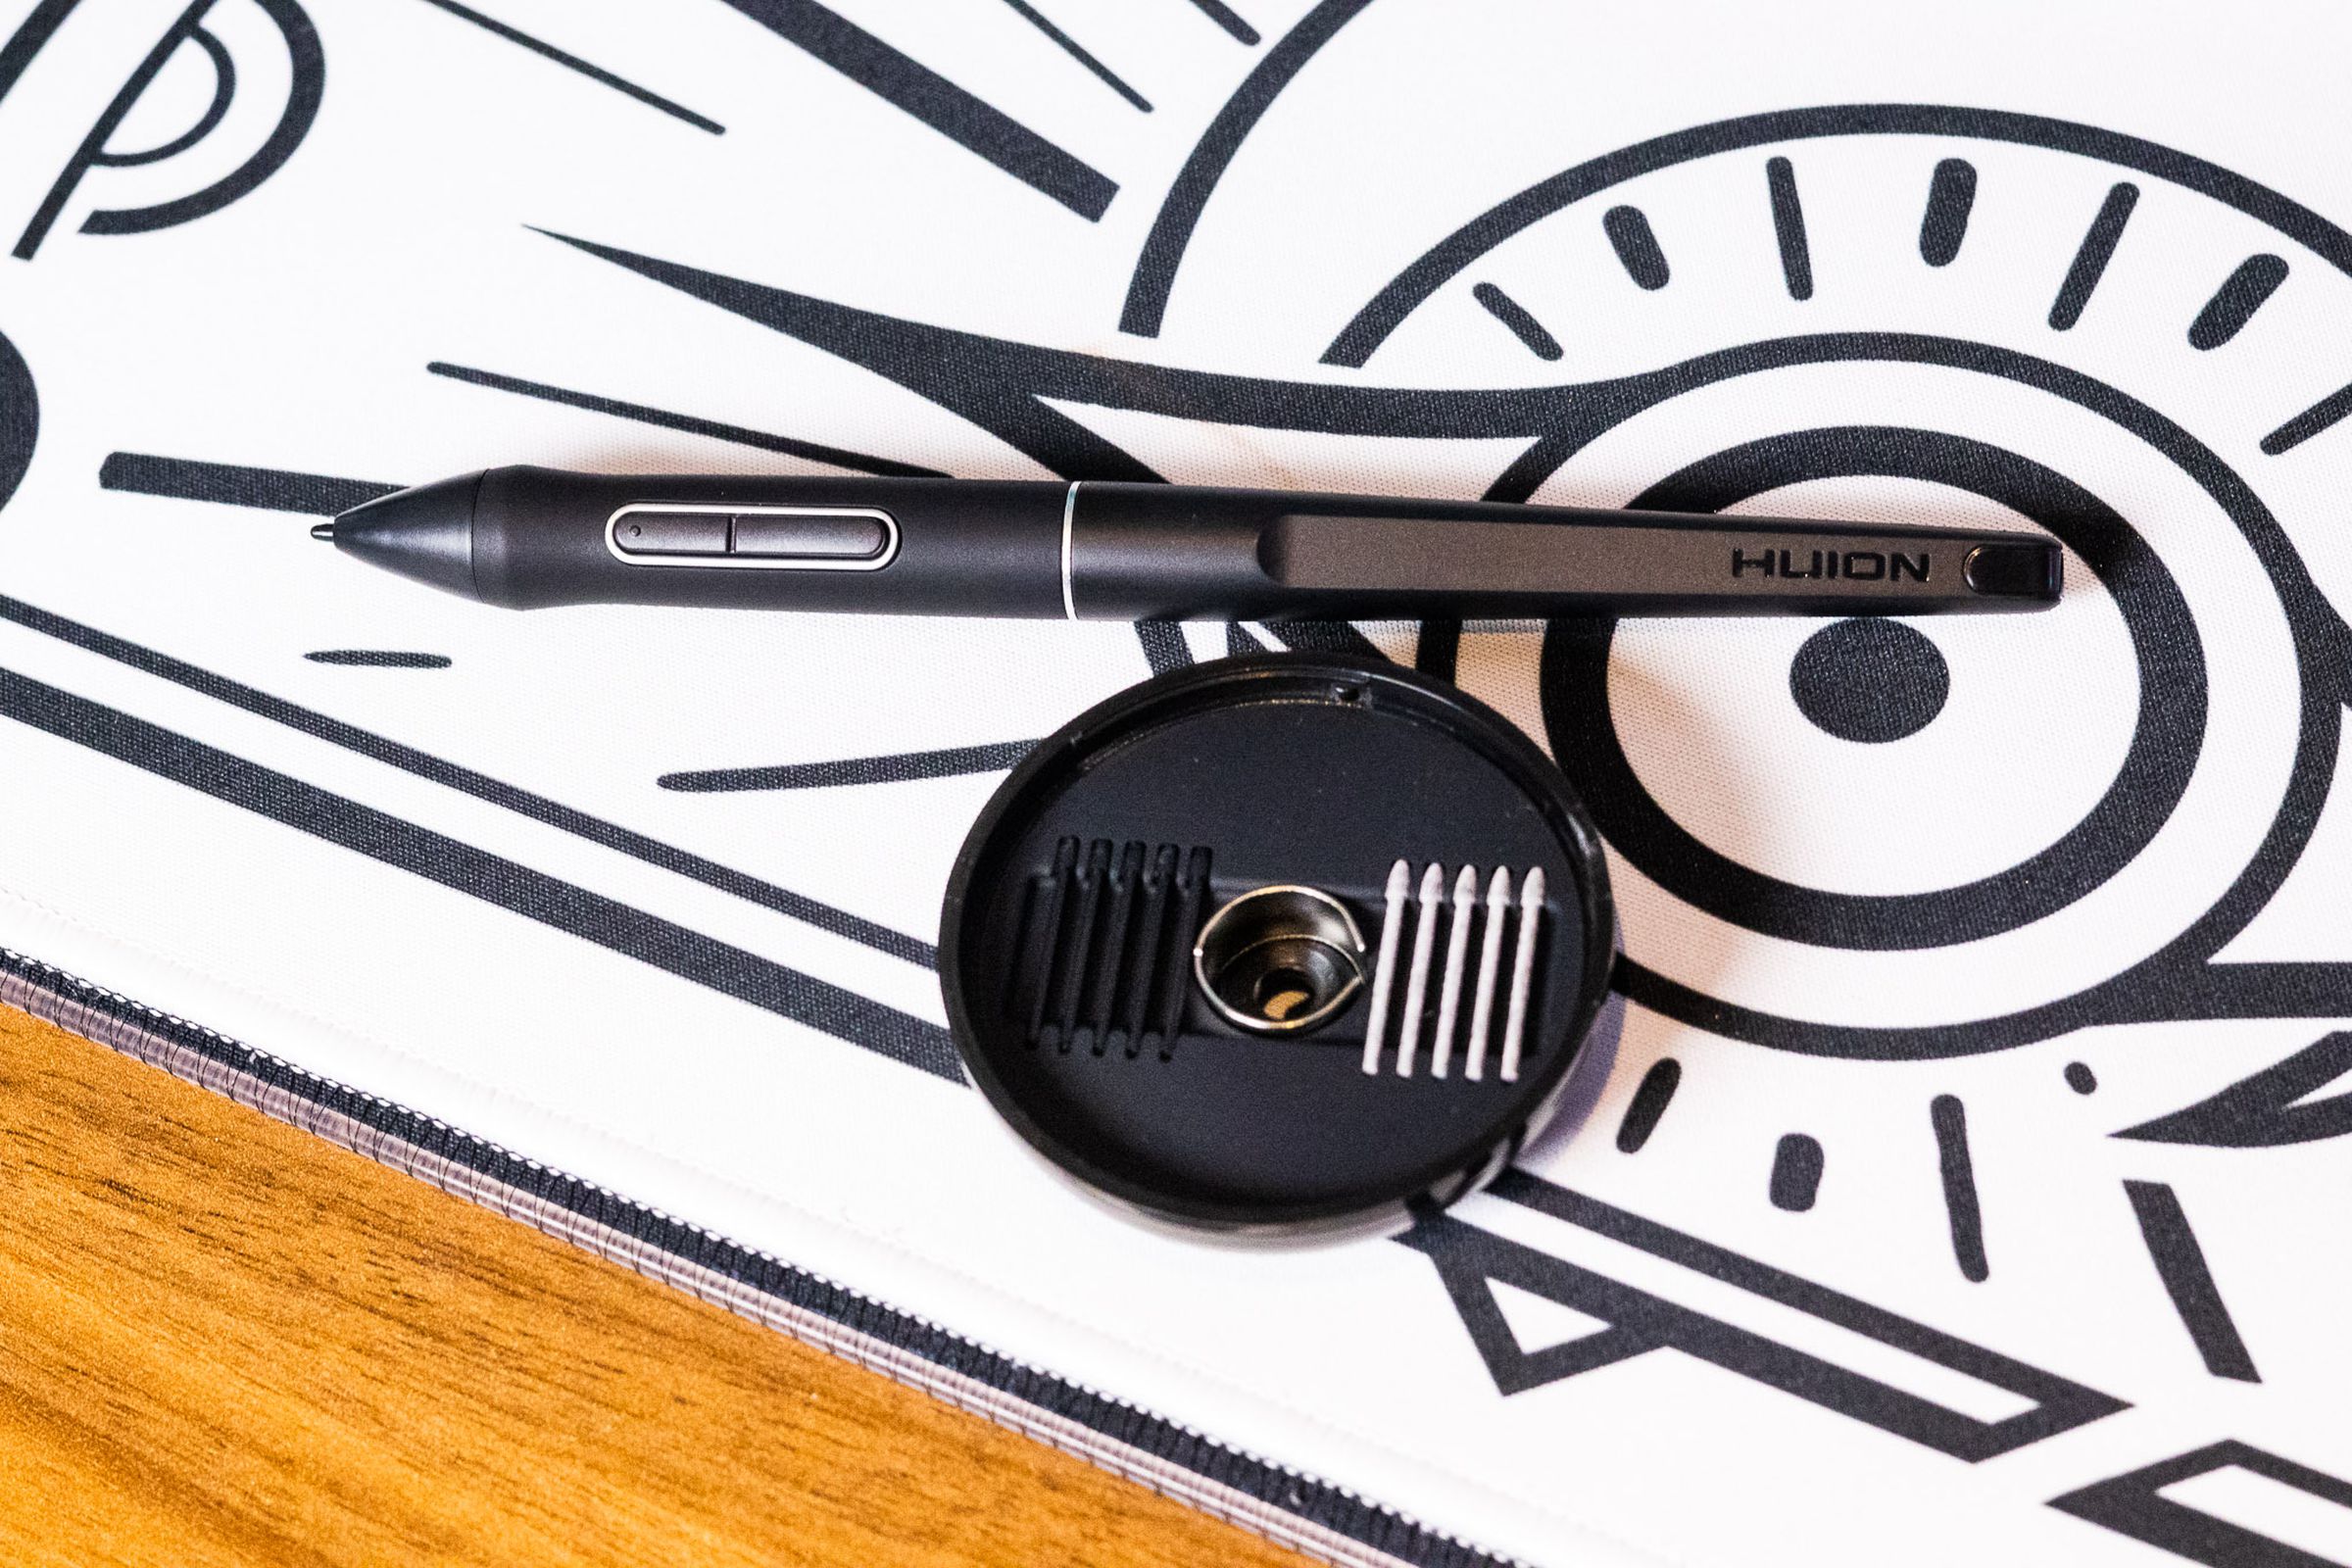 The stylus and donut-style pen stand for the Huion Kamvas Pro 16 (2.5k)